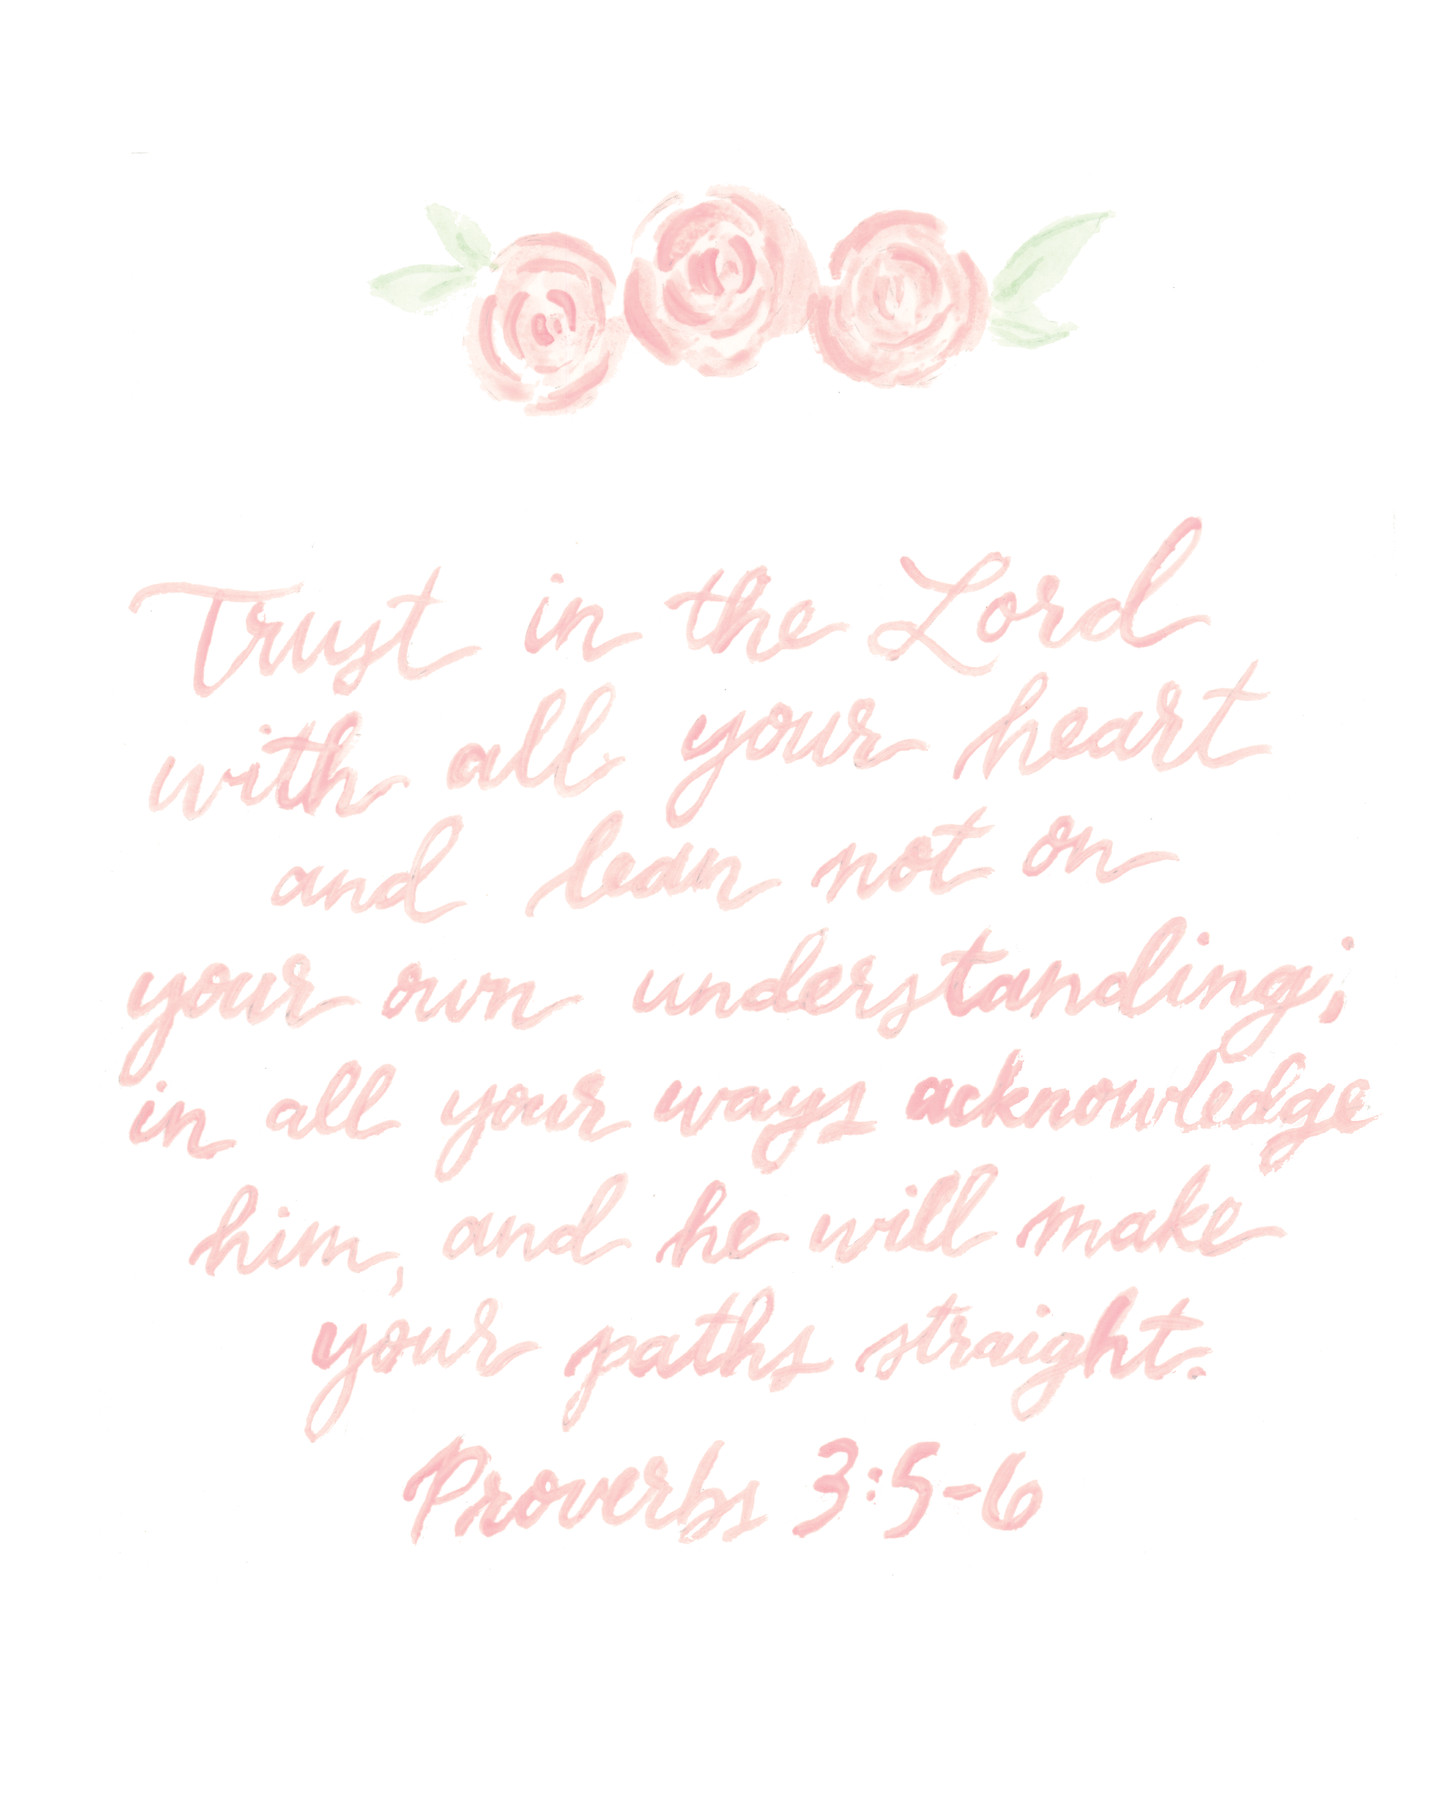 Proverbs 3:5-6 Art Print in Pink